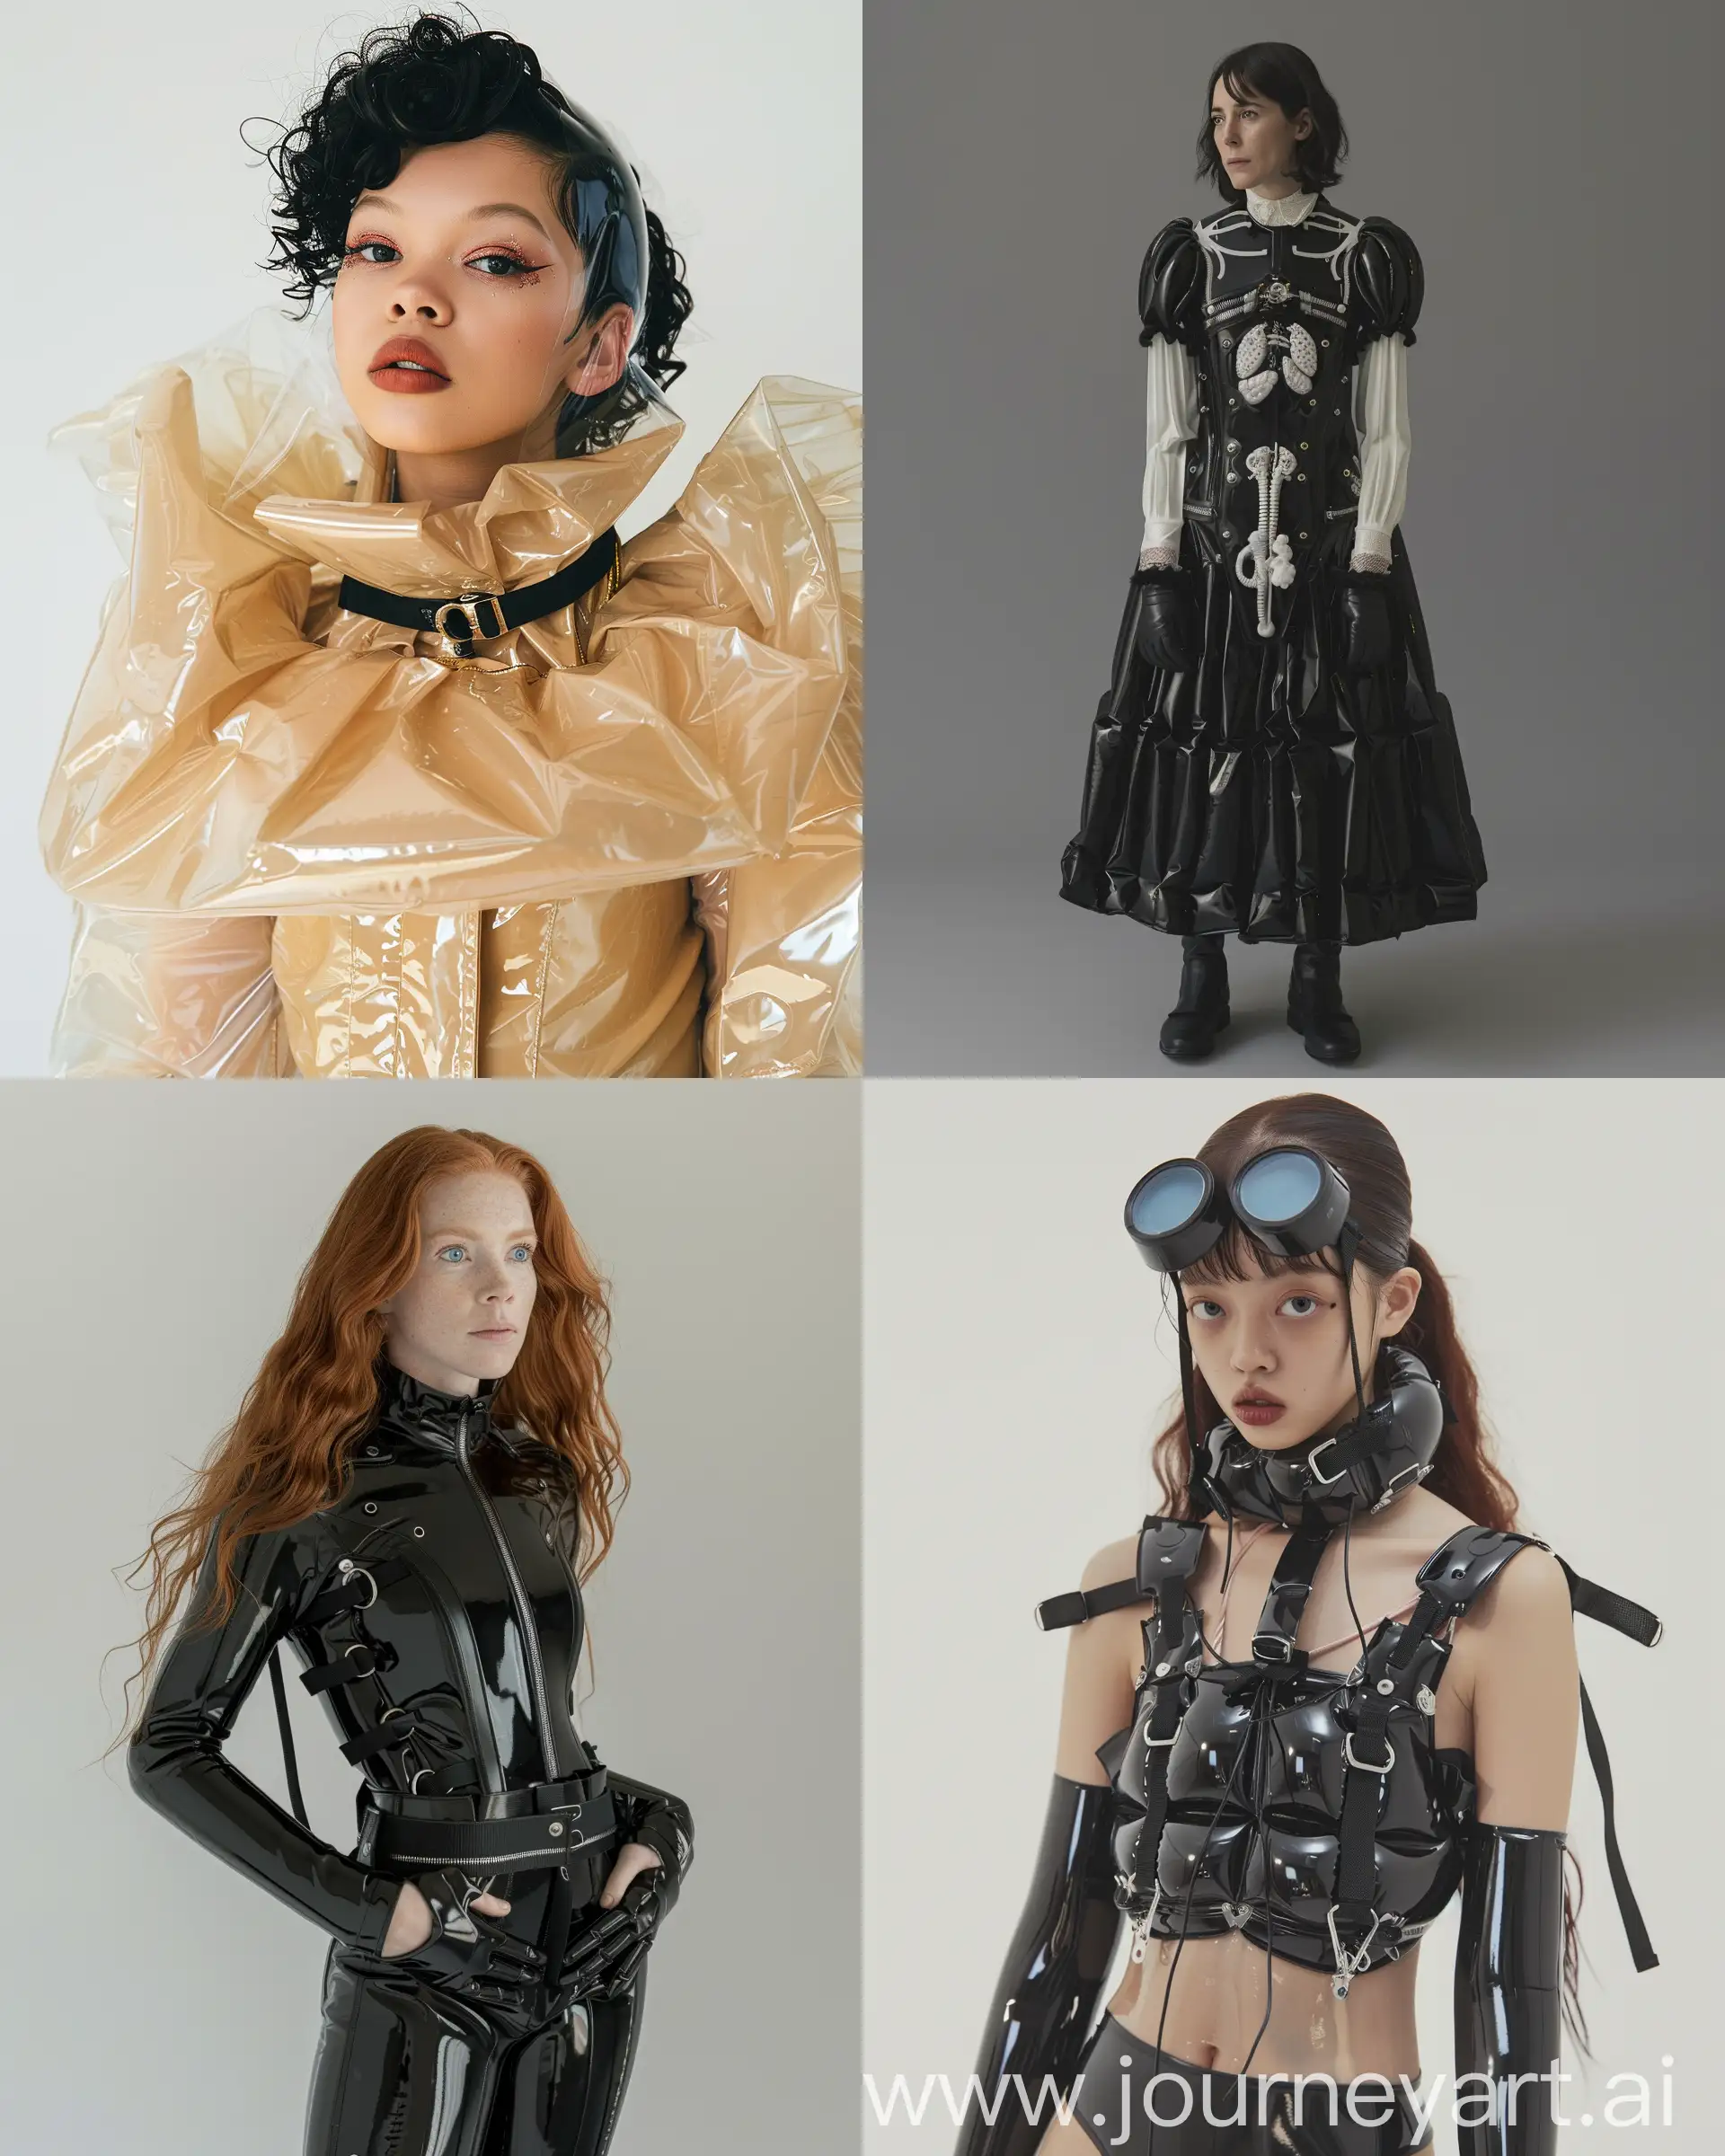 Avant-Garde-Fashion-Portrait-Biomechanical-Haute-Couture-with-Inflatable-Safety-Clothes